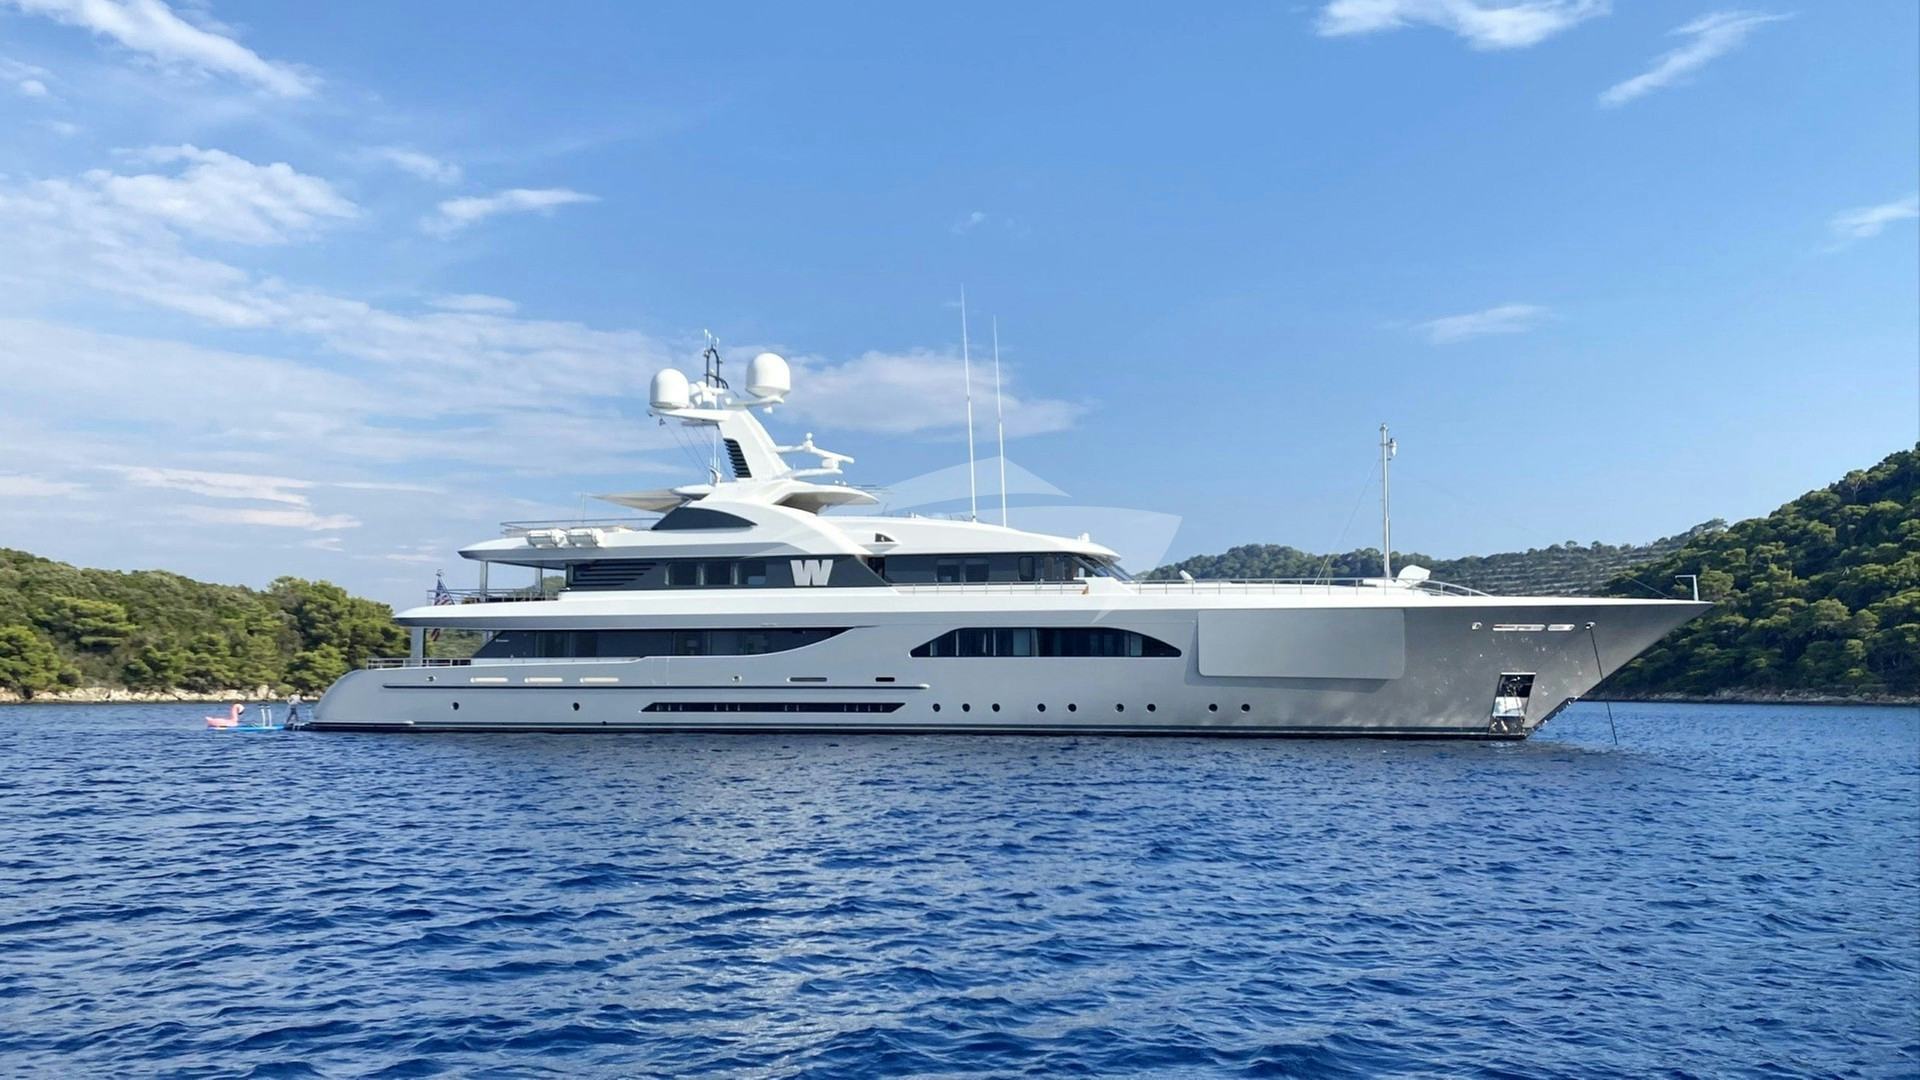 Charter W, Feadship, 57.6m motor yacht - Charter Index